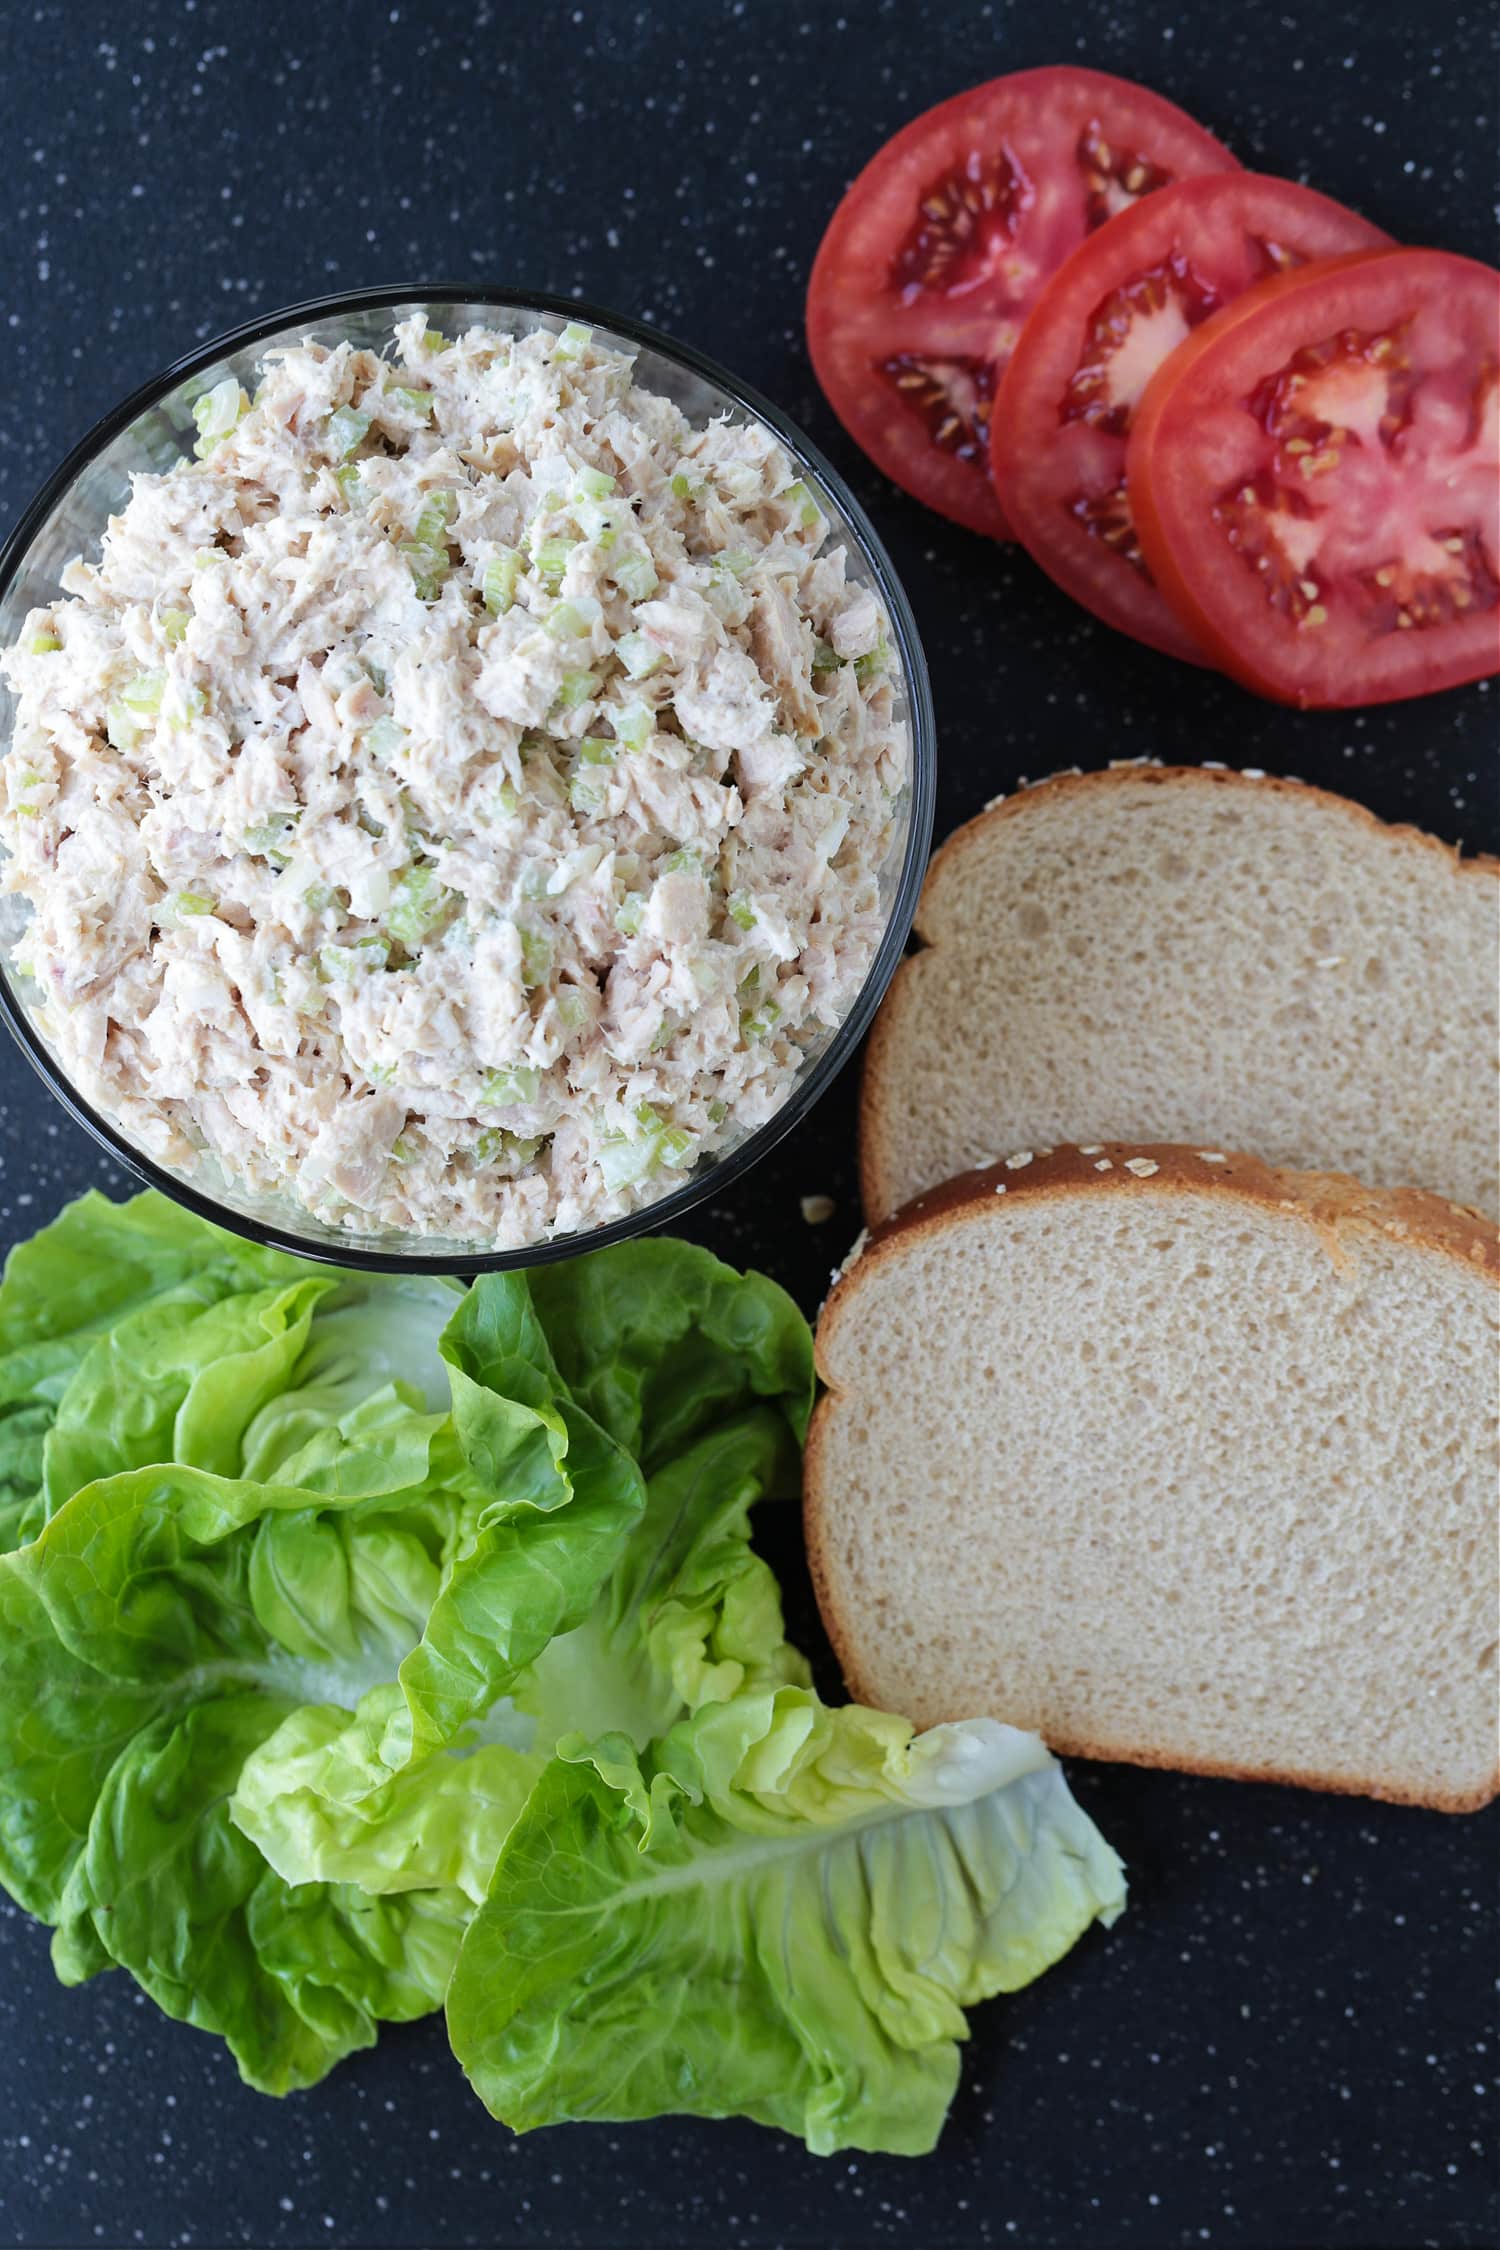 tuna fish salad with bread, tomatoes and lettuce on a board